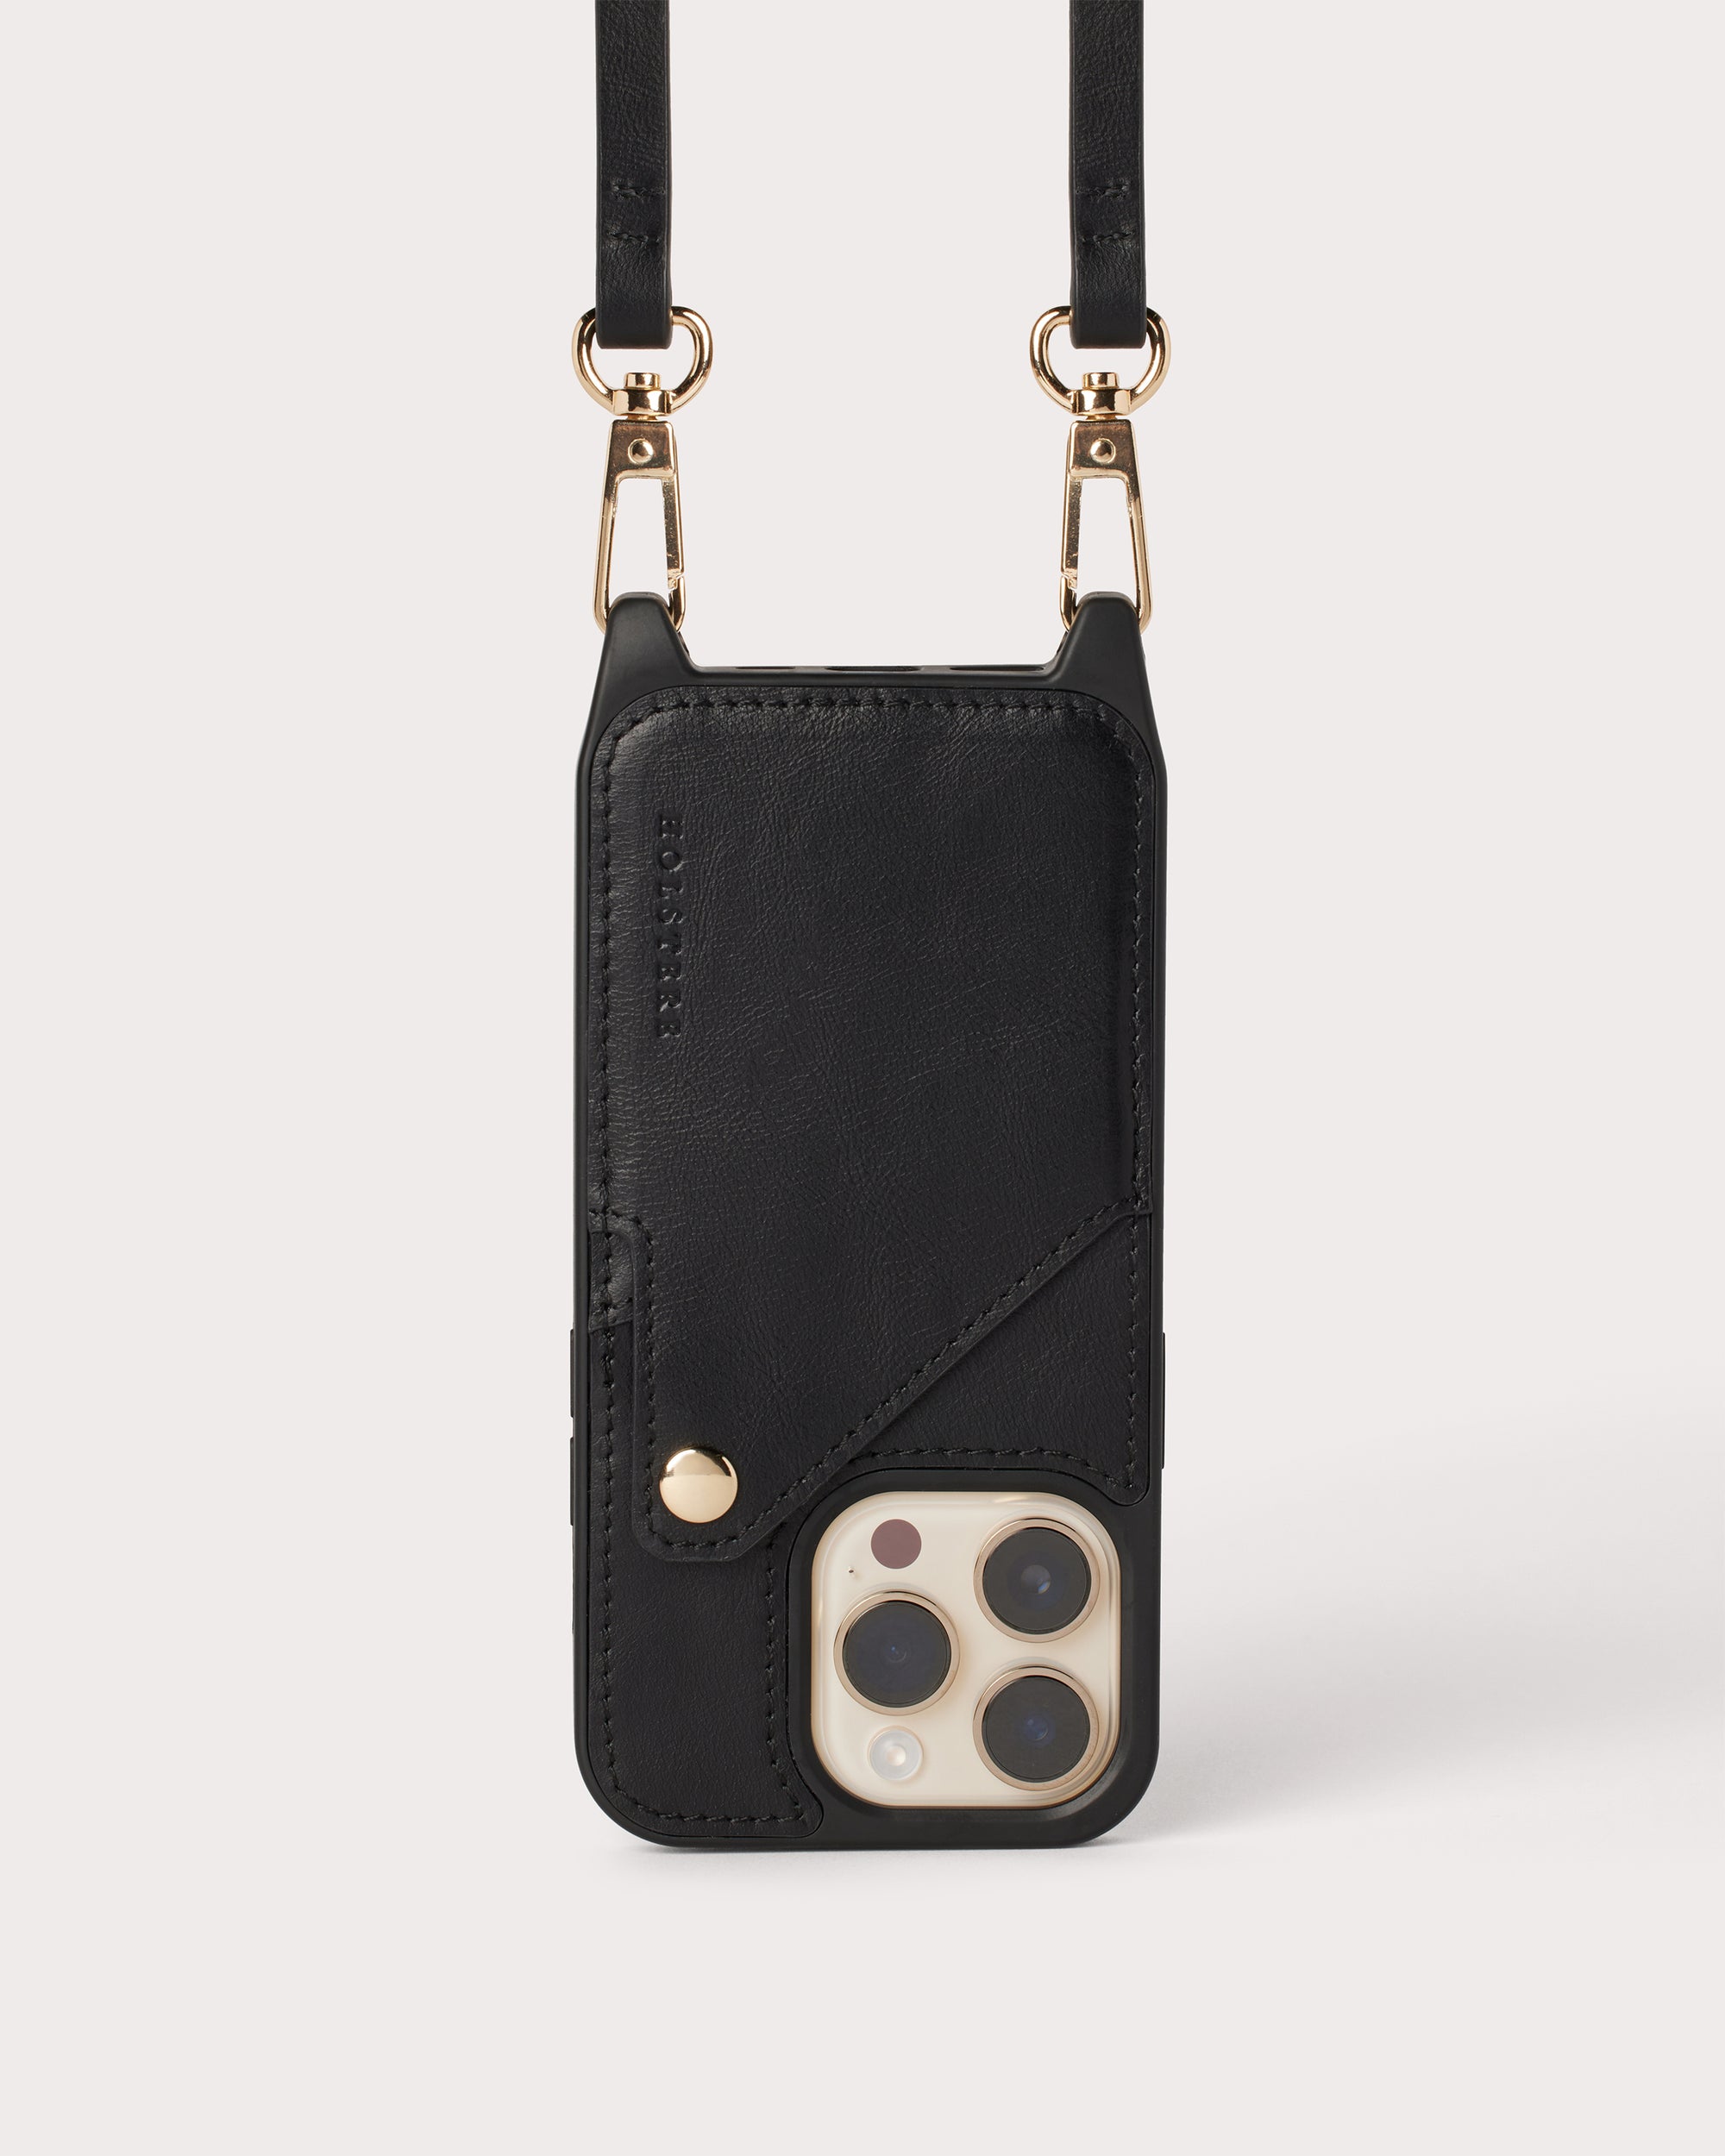 The Olivia Black | Ultra-Durable Genuine Smooth Leather iPhone Case Cr ...